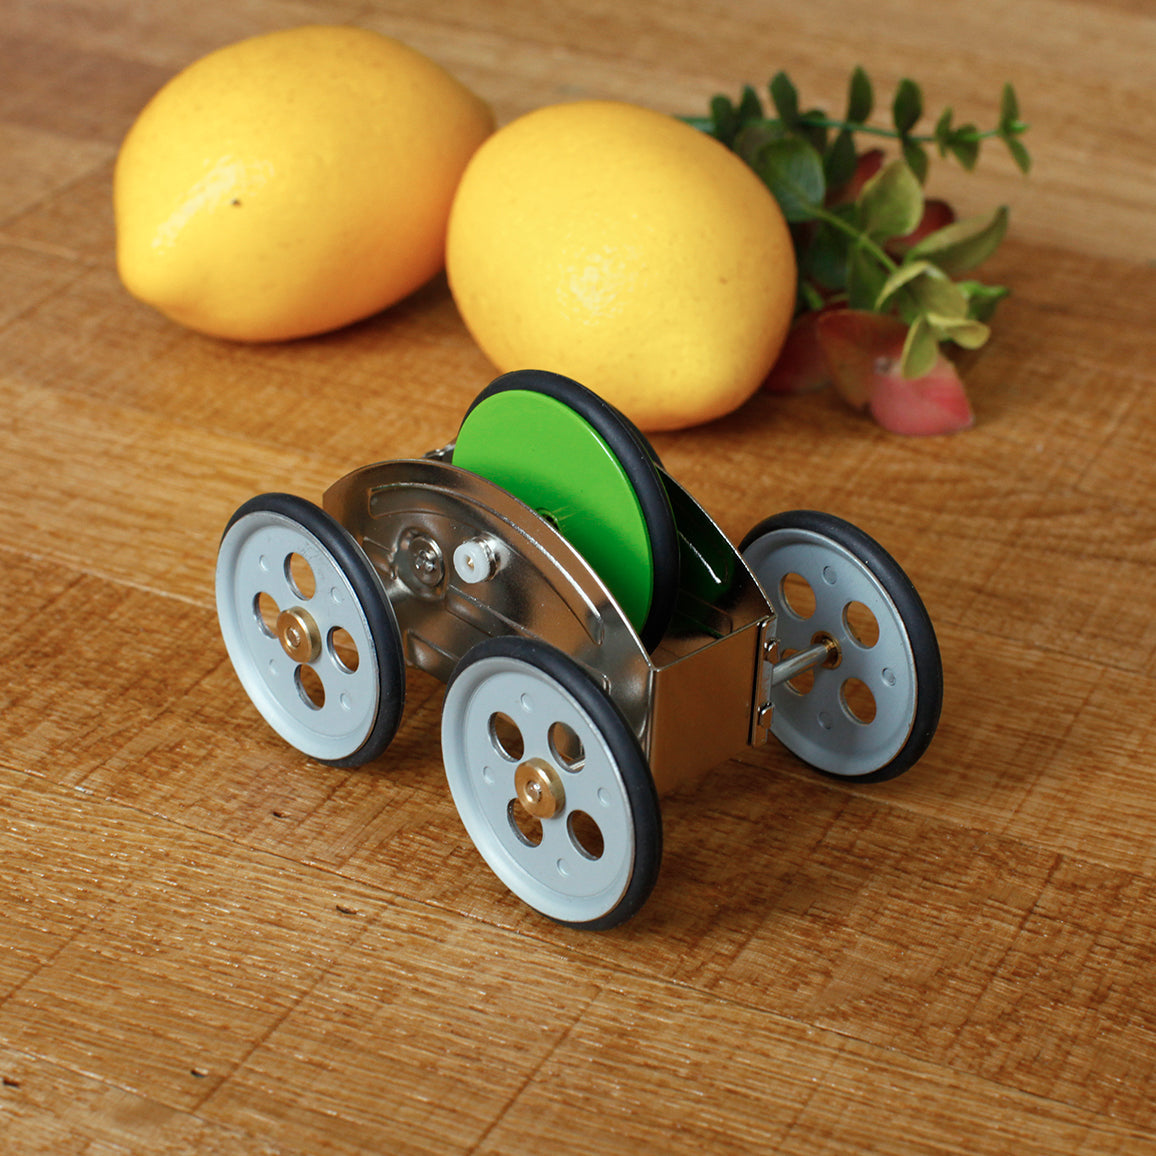 Zécar Flywheel Toy Car – Assorted Colors - Each Sold Separately